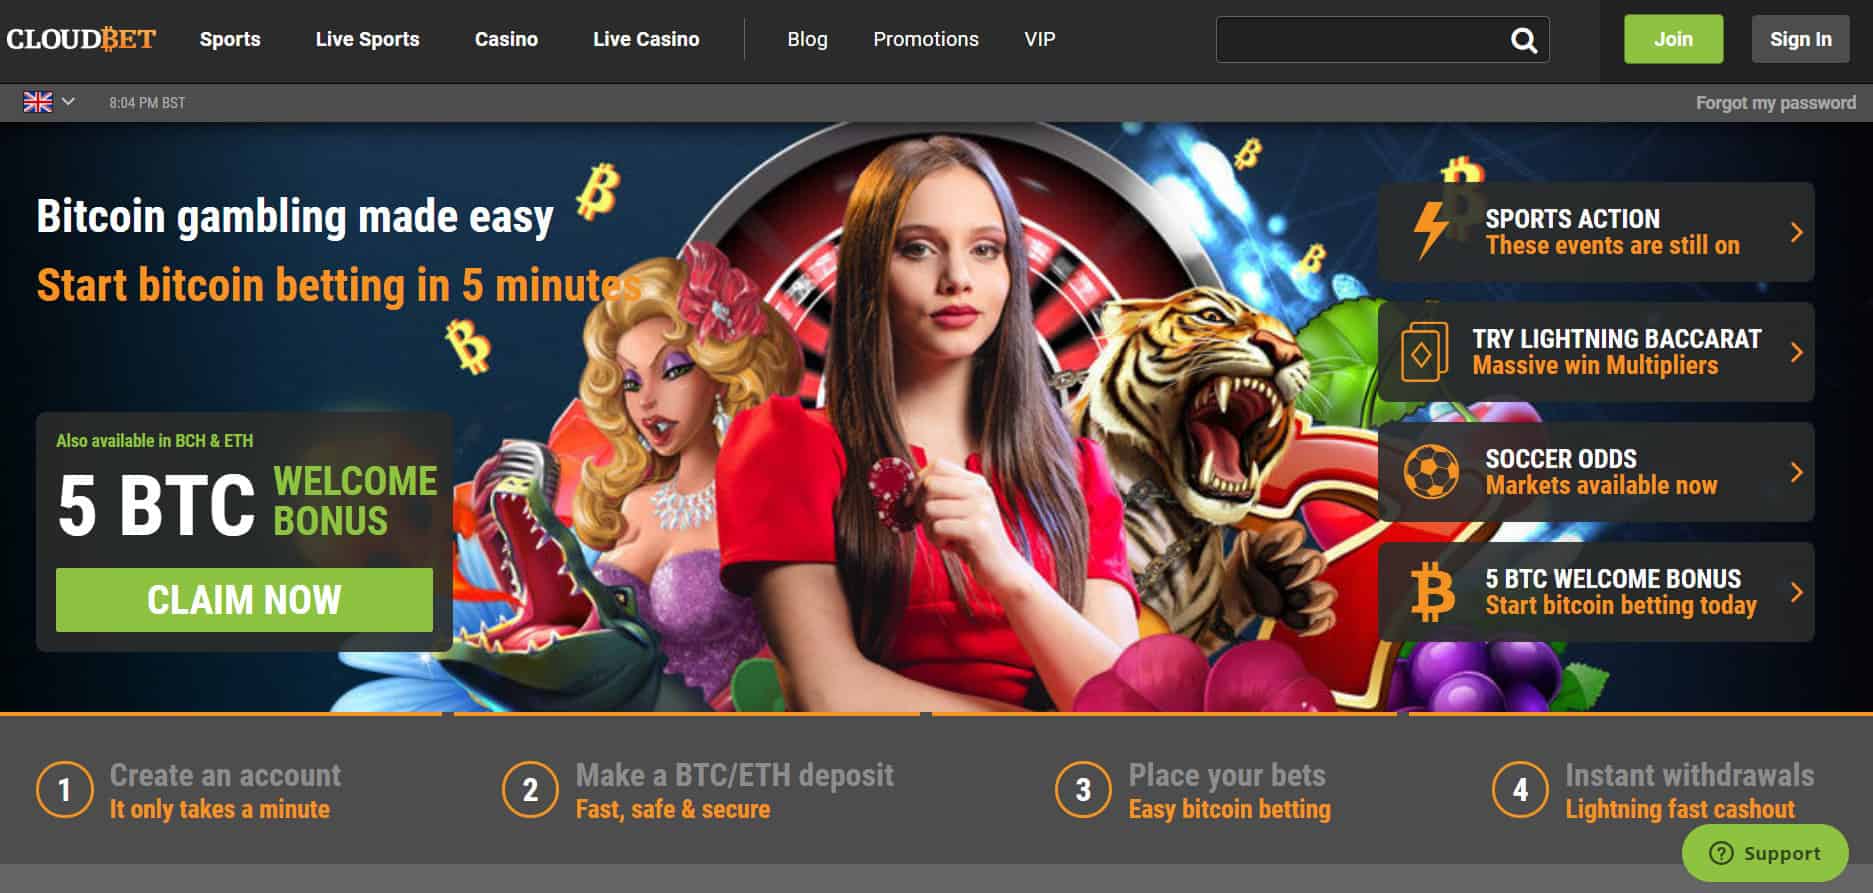 Now You Can Have The top bitcoin casinos Of Your Dreams – Cheaper/Faster Than You Ever Imagined